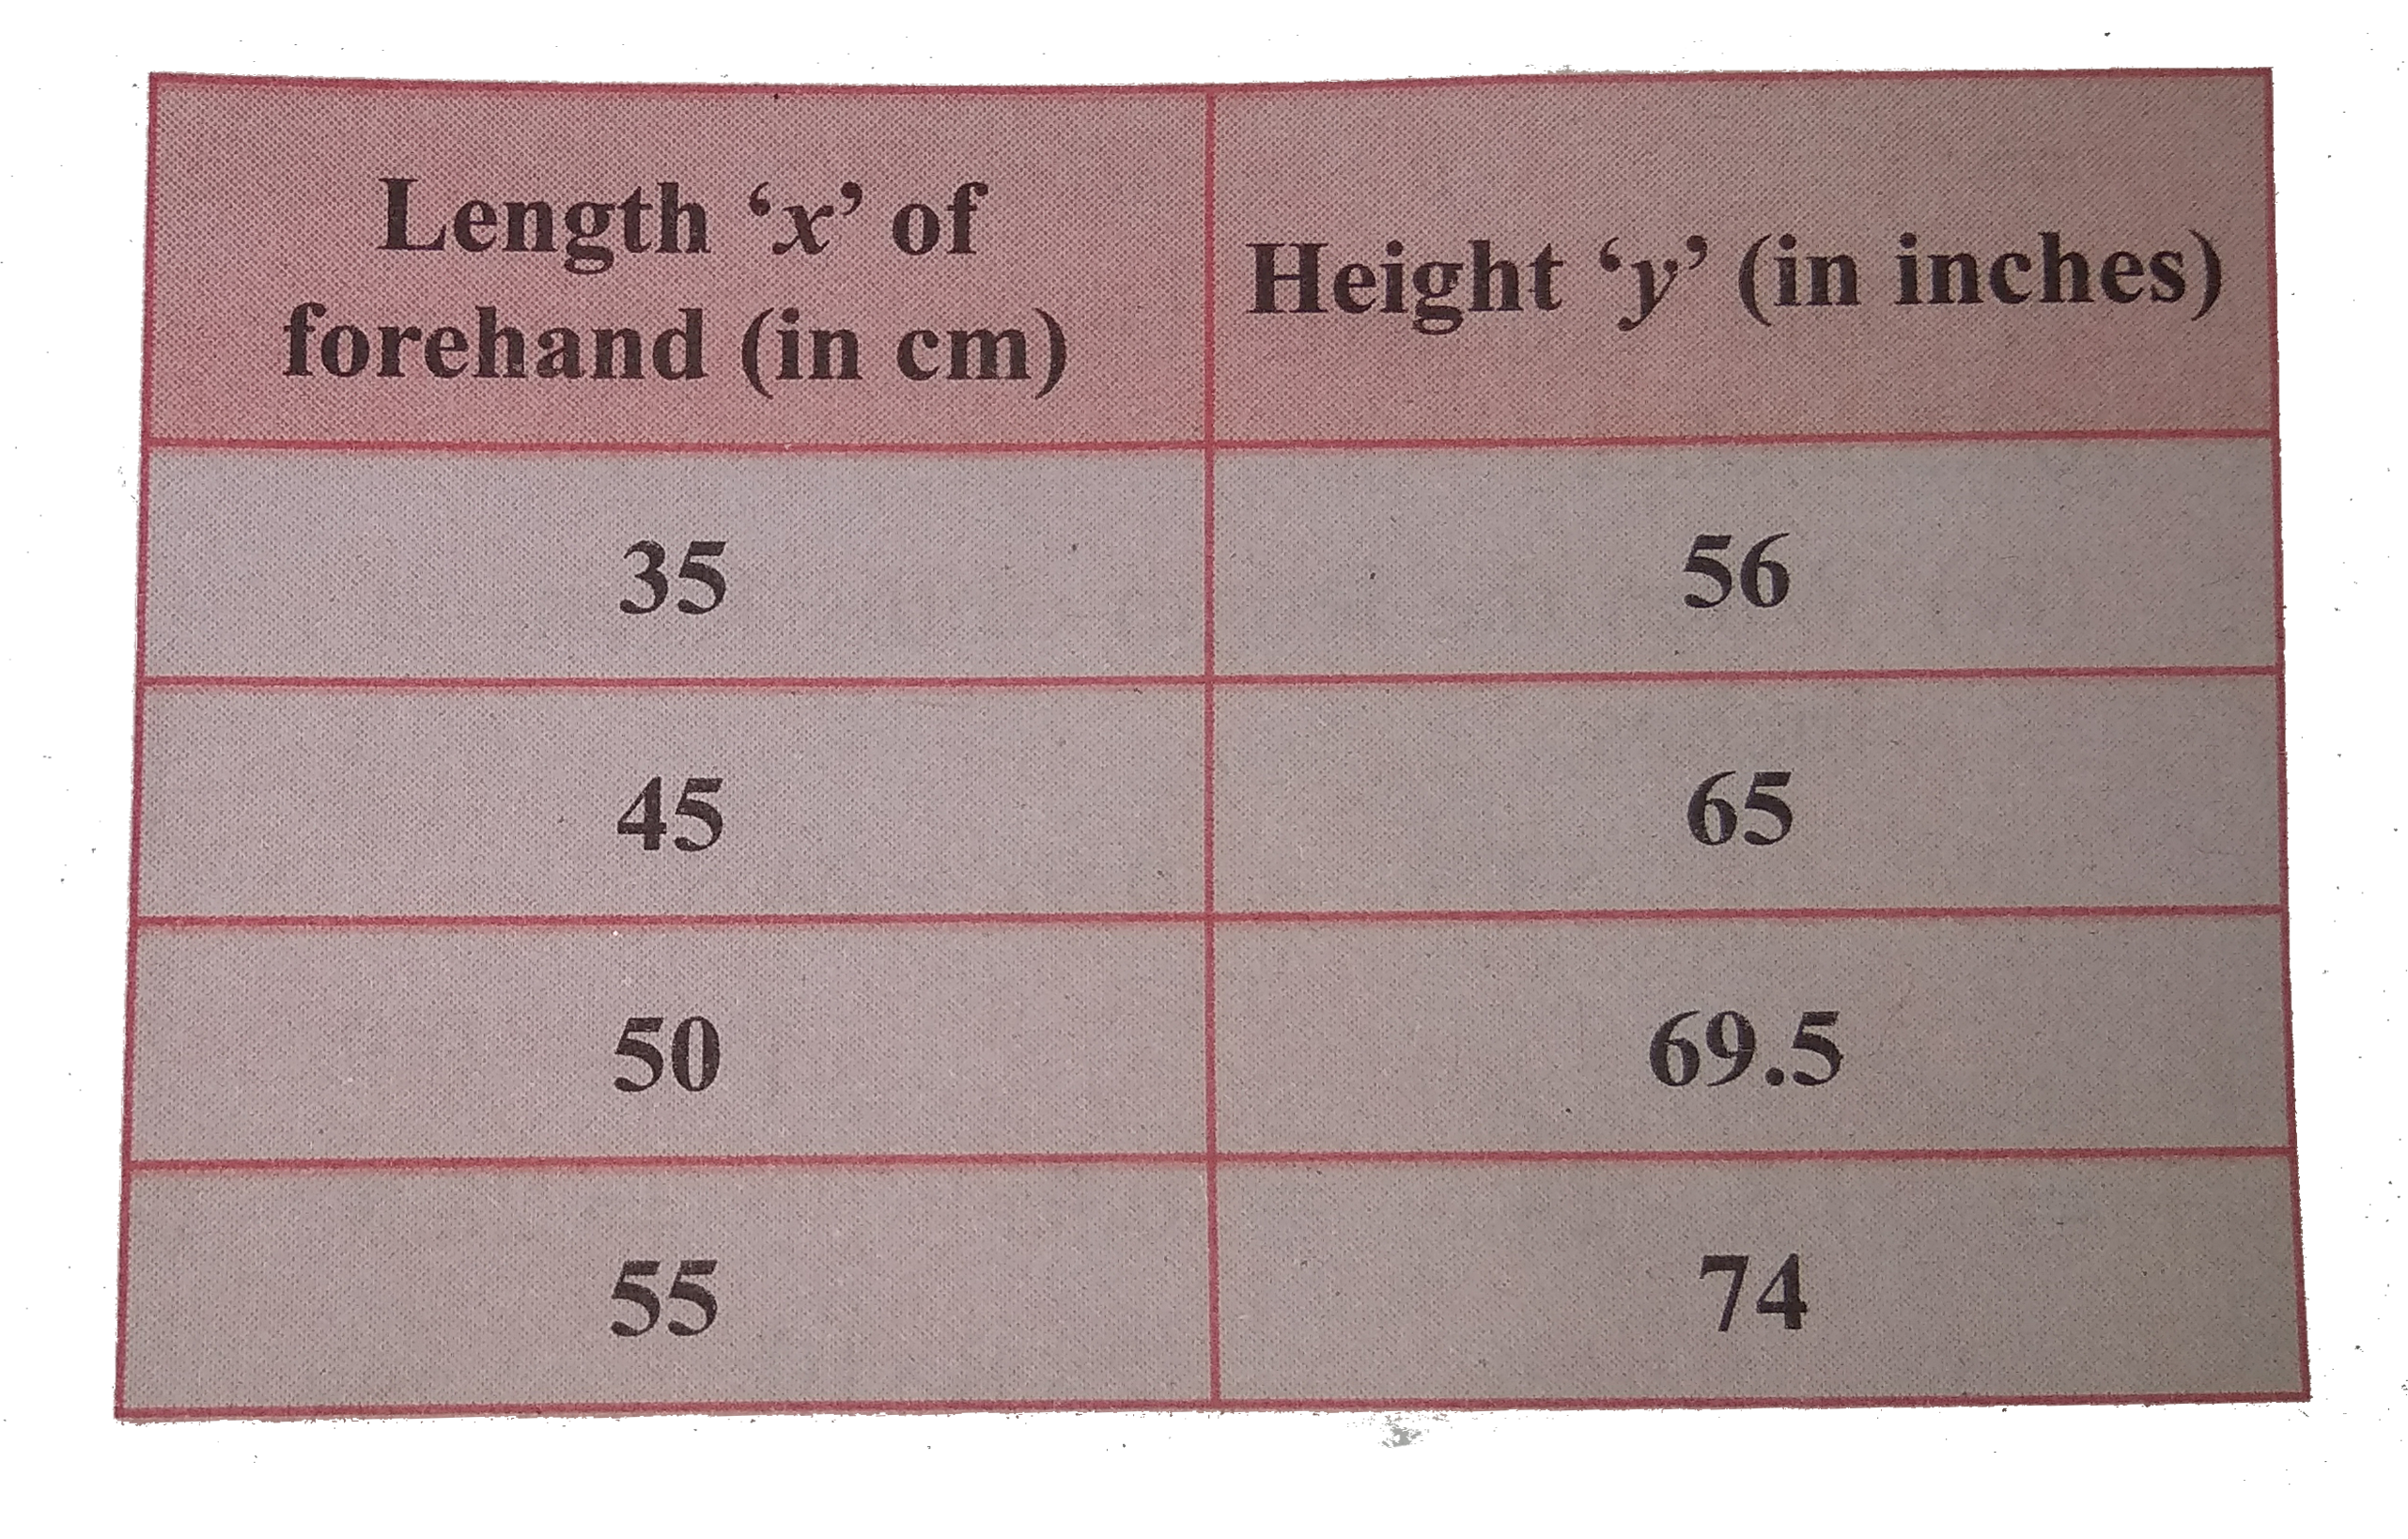 The data in the adjcent table depicts the length of a woman's foreheads and her corresponding height. Based on this data, a student finds a relationship between the height (y) and the forehead length (x) as y=ax+b, where a, b are constants.     Check if this relation is a functions.